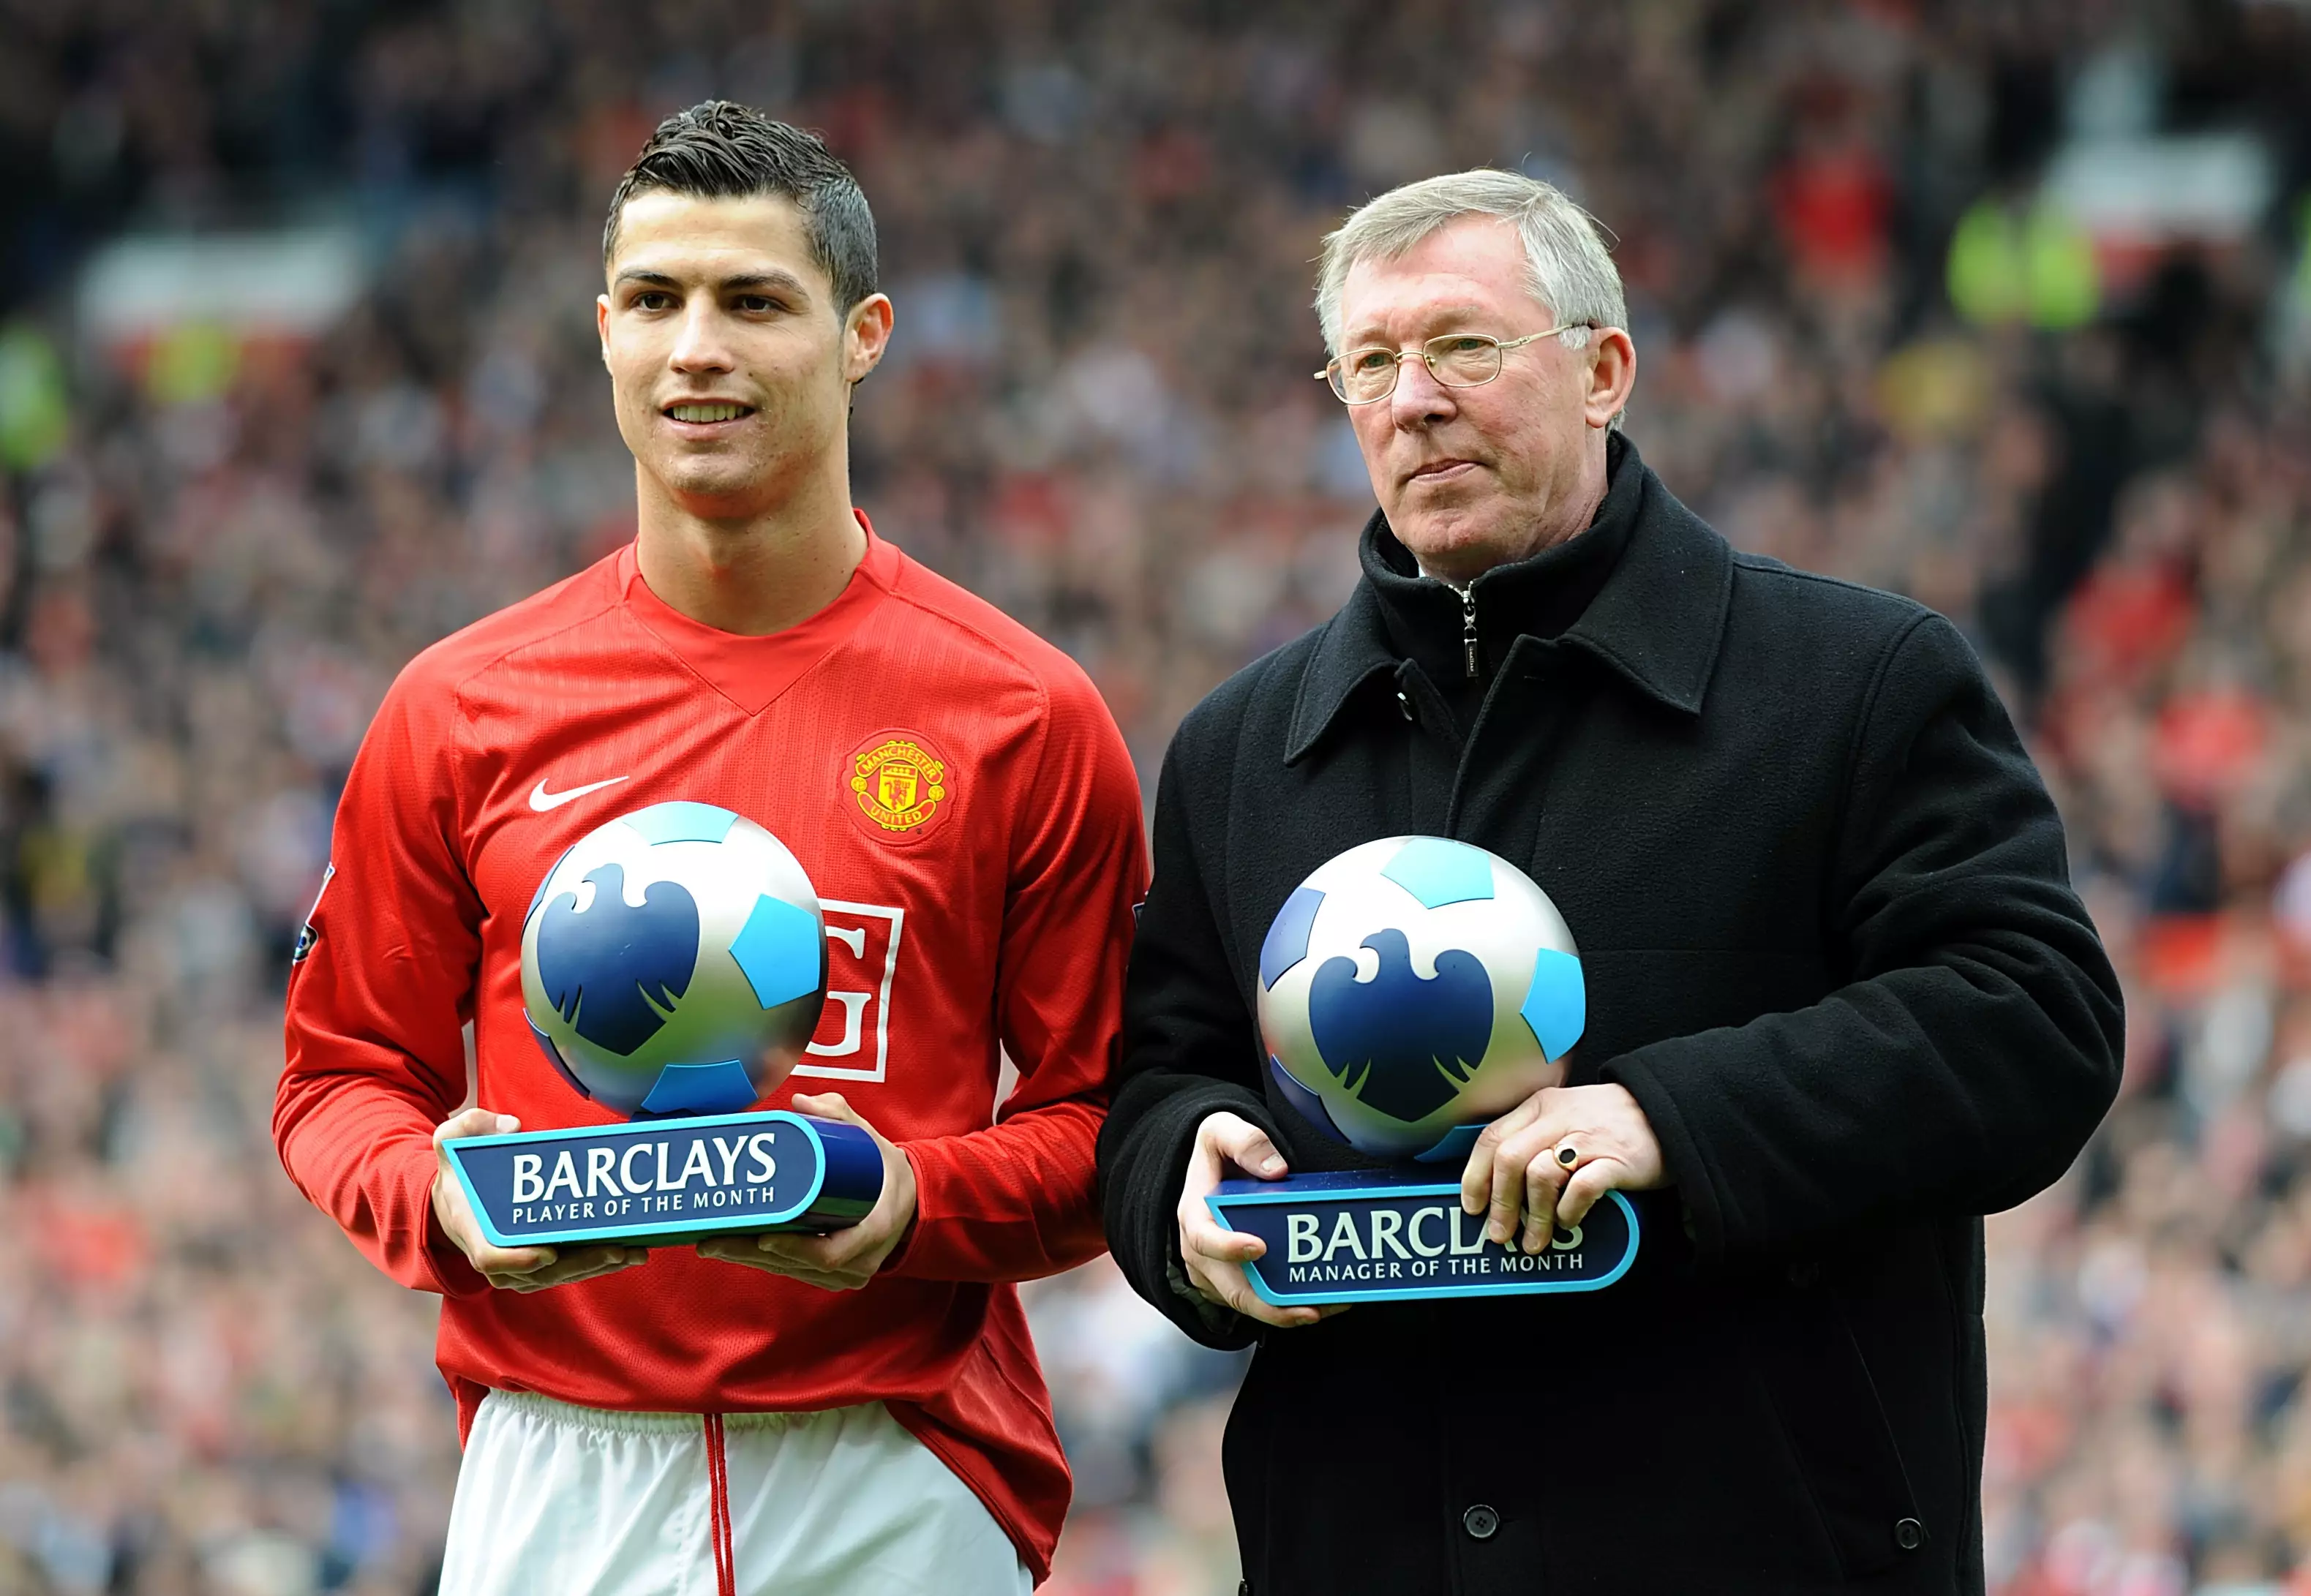 Ronaldo and Sir Alex won a slew of awards together. (Image